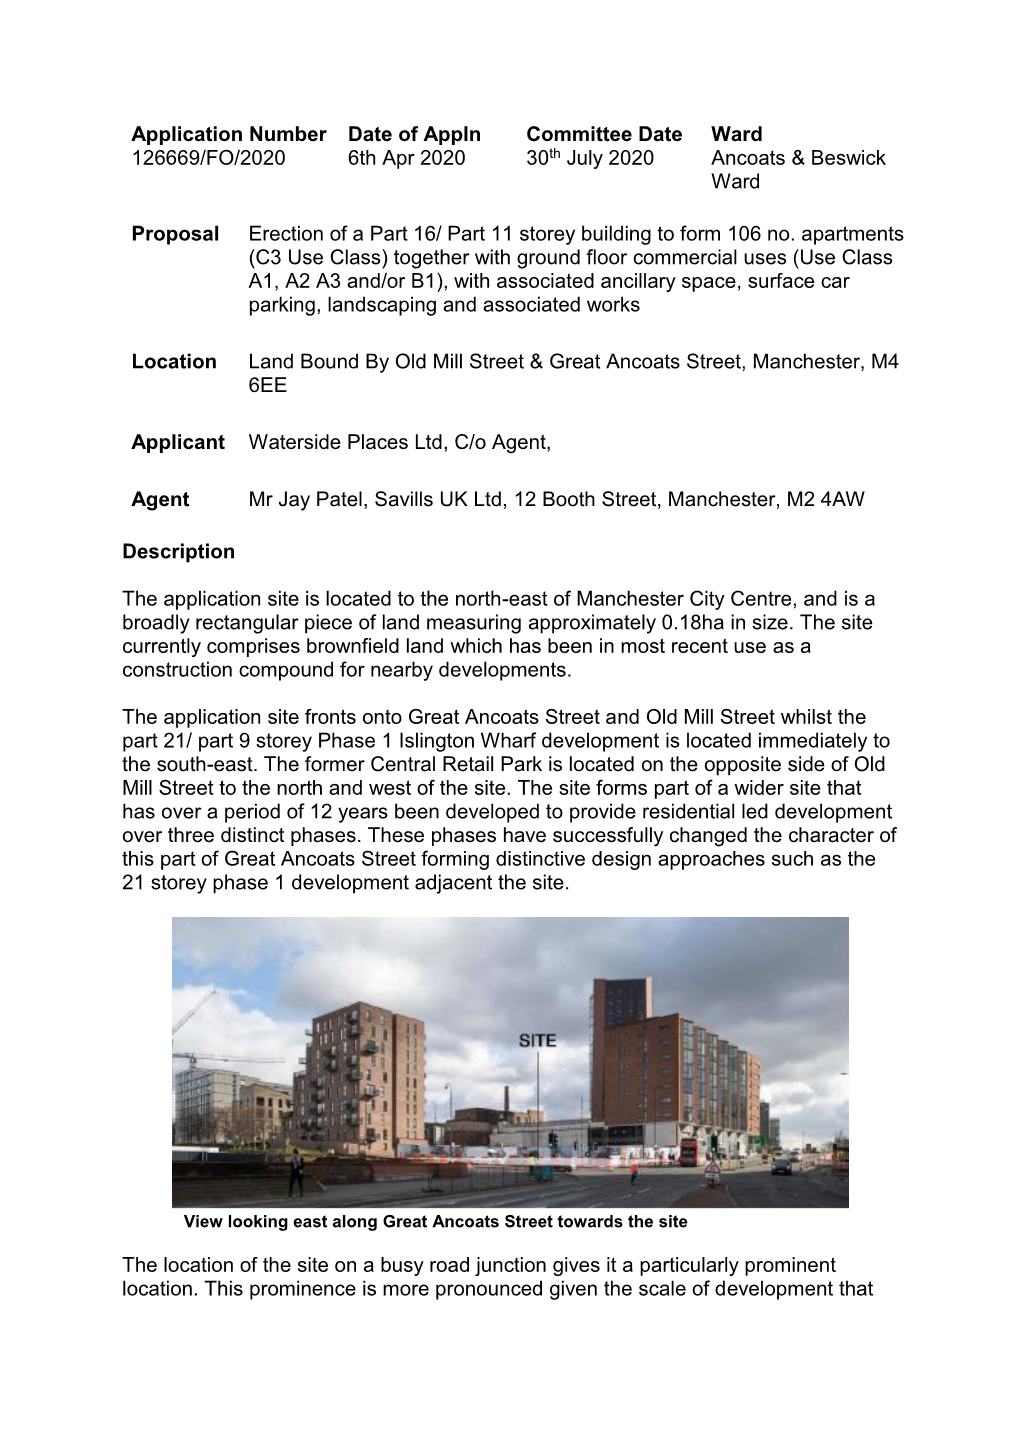 Application Number Date of Appln Committee Date Ward 126669/FO/2020 6Th Apr 2020 30Th July 2020 Ancoats & Beswick Ward